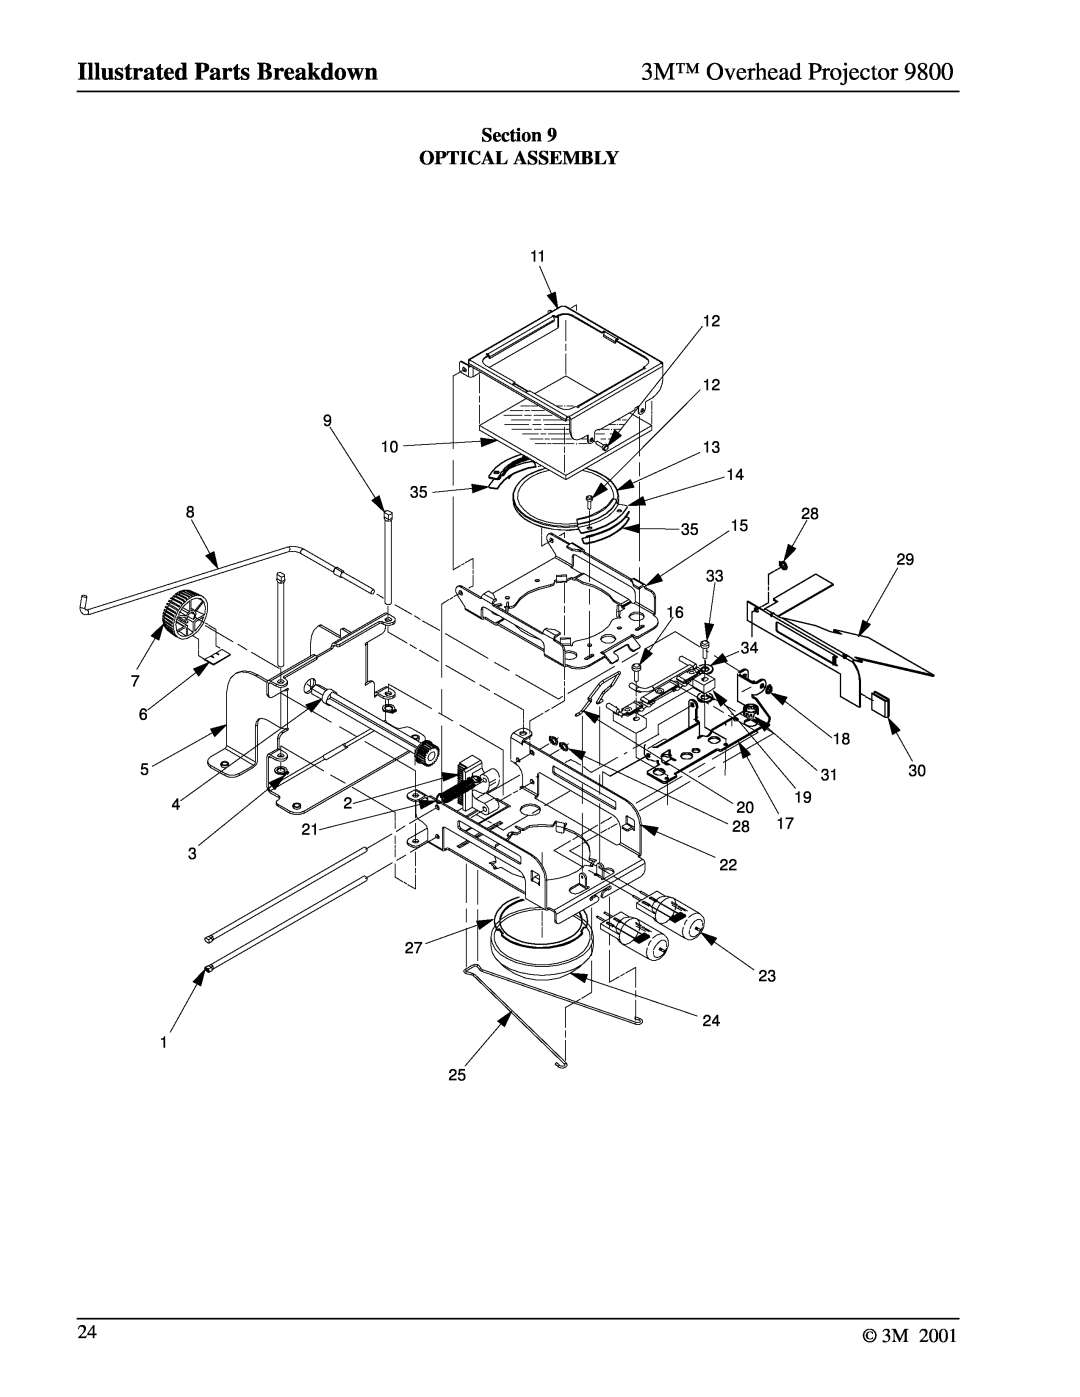 3M 9800 manual Section OPTICAL ASSEMBLY, Illustrated Parts Breakdown, 3M Overhead Projector 